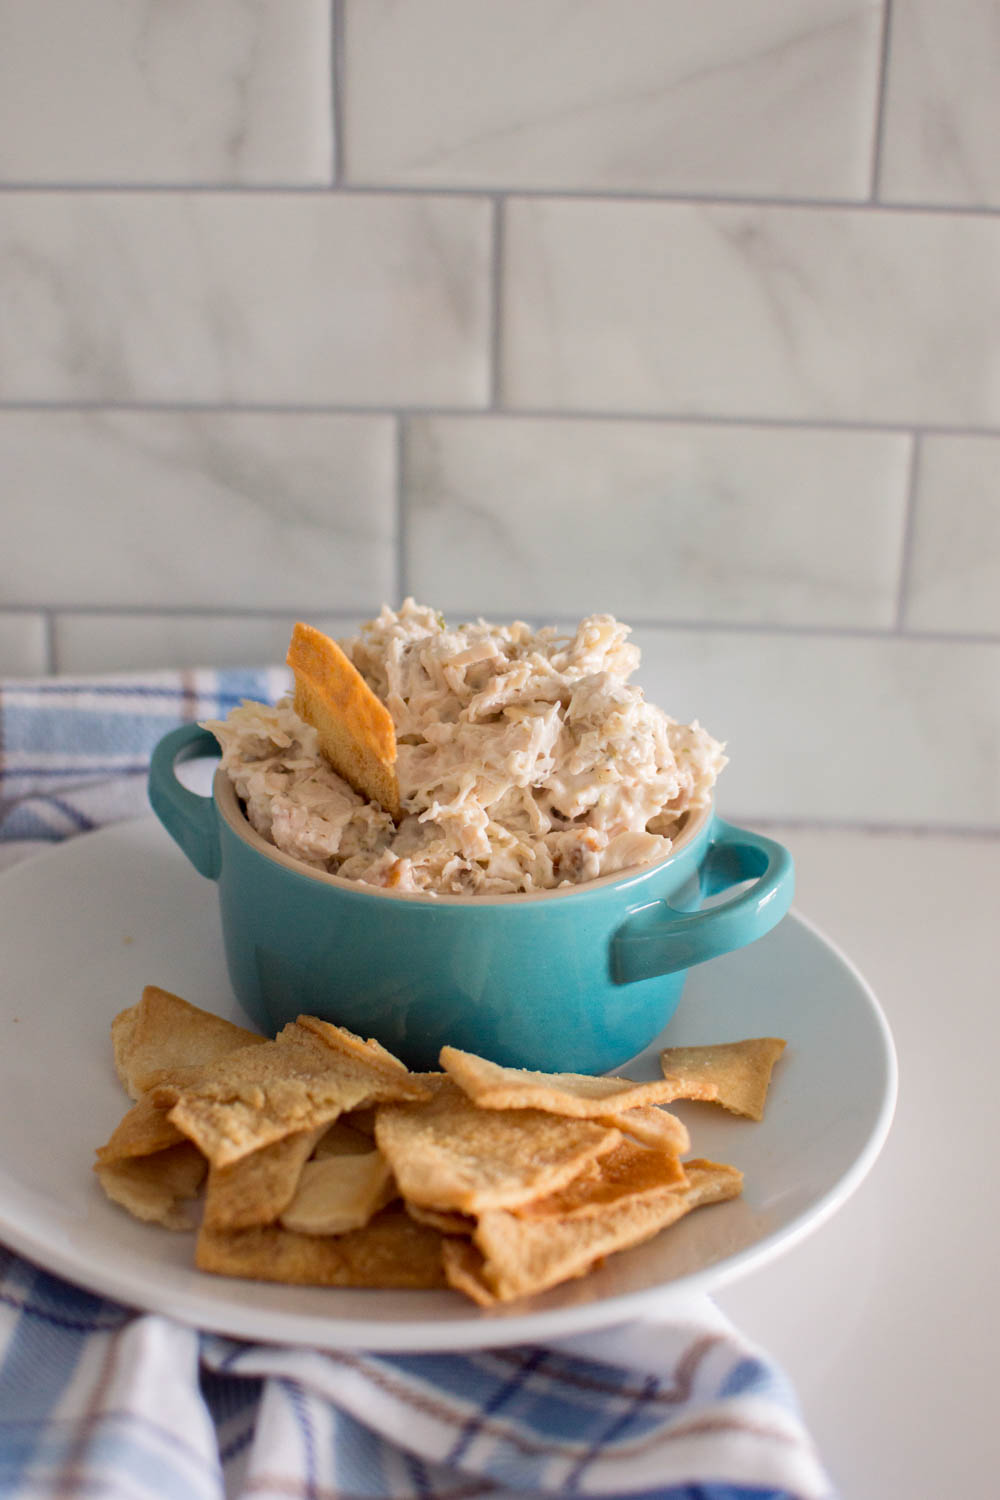 Chicken salad in a turquoise bowl, on a white plate and surrounded by pita chips